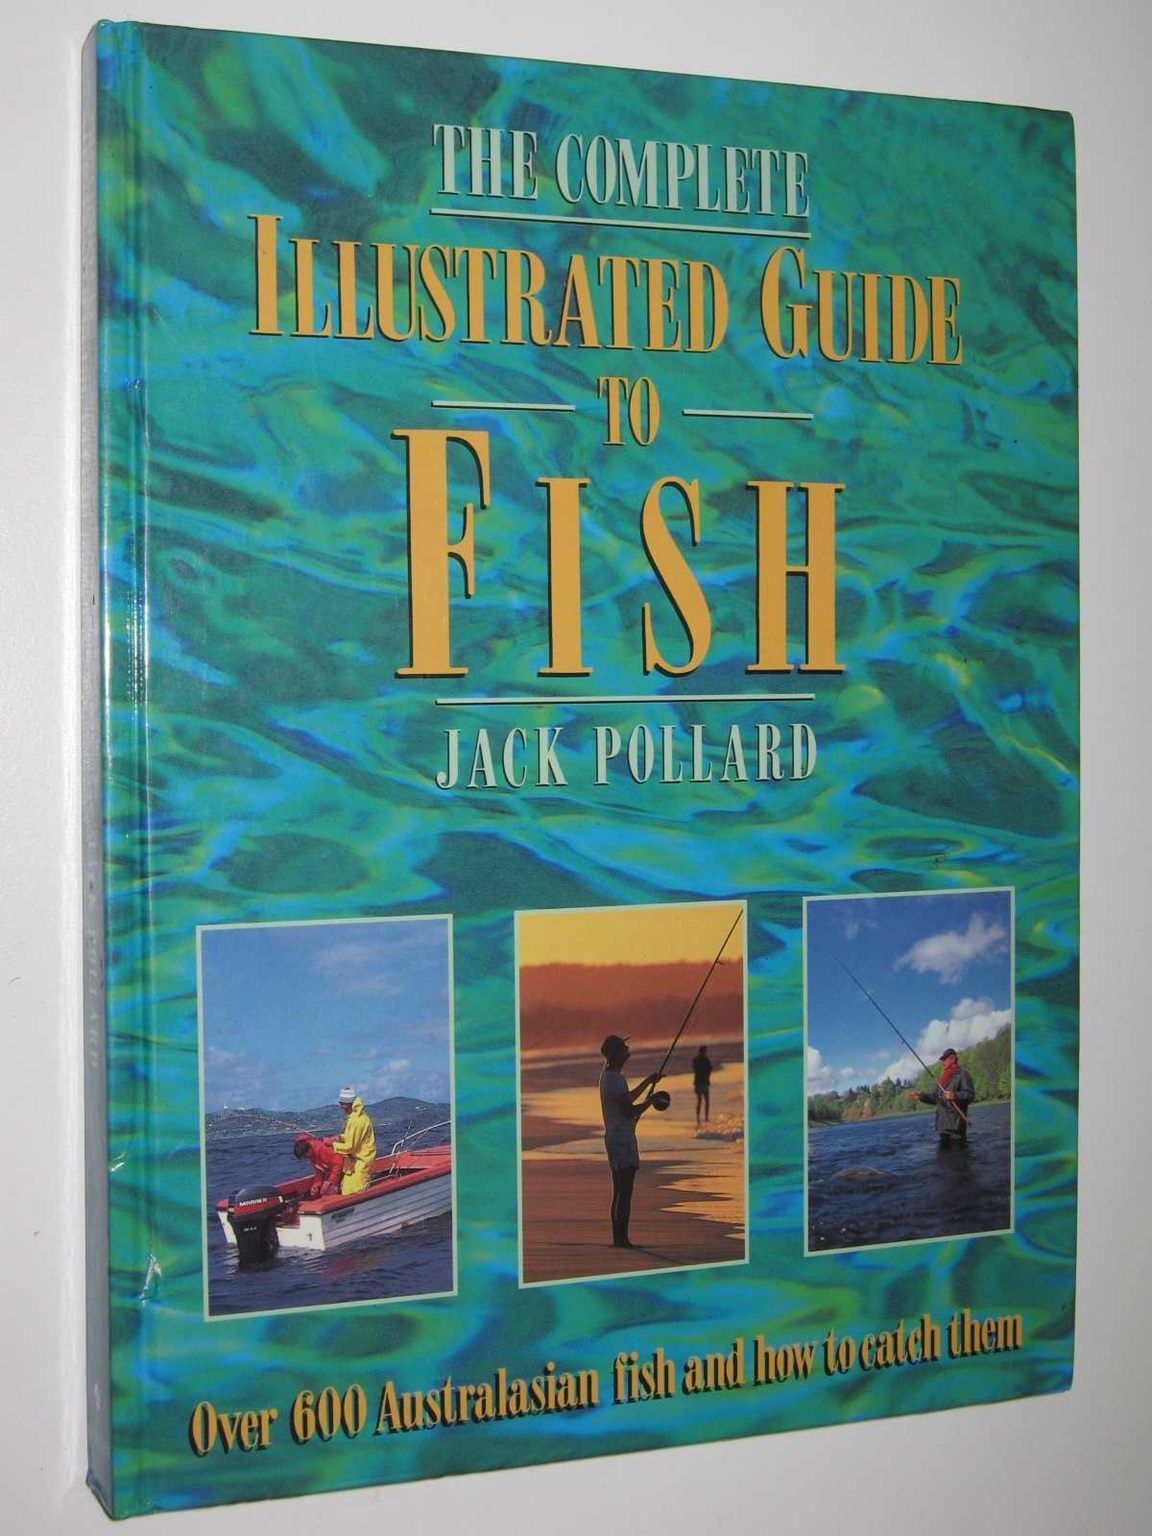 COMPLETE ILLUSTRATED GUIDE TO FISH